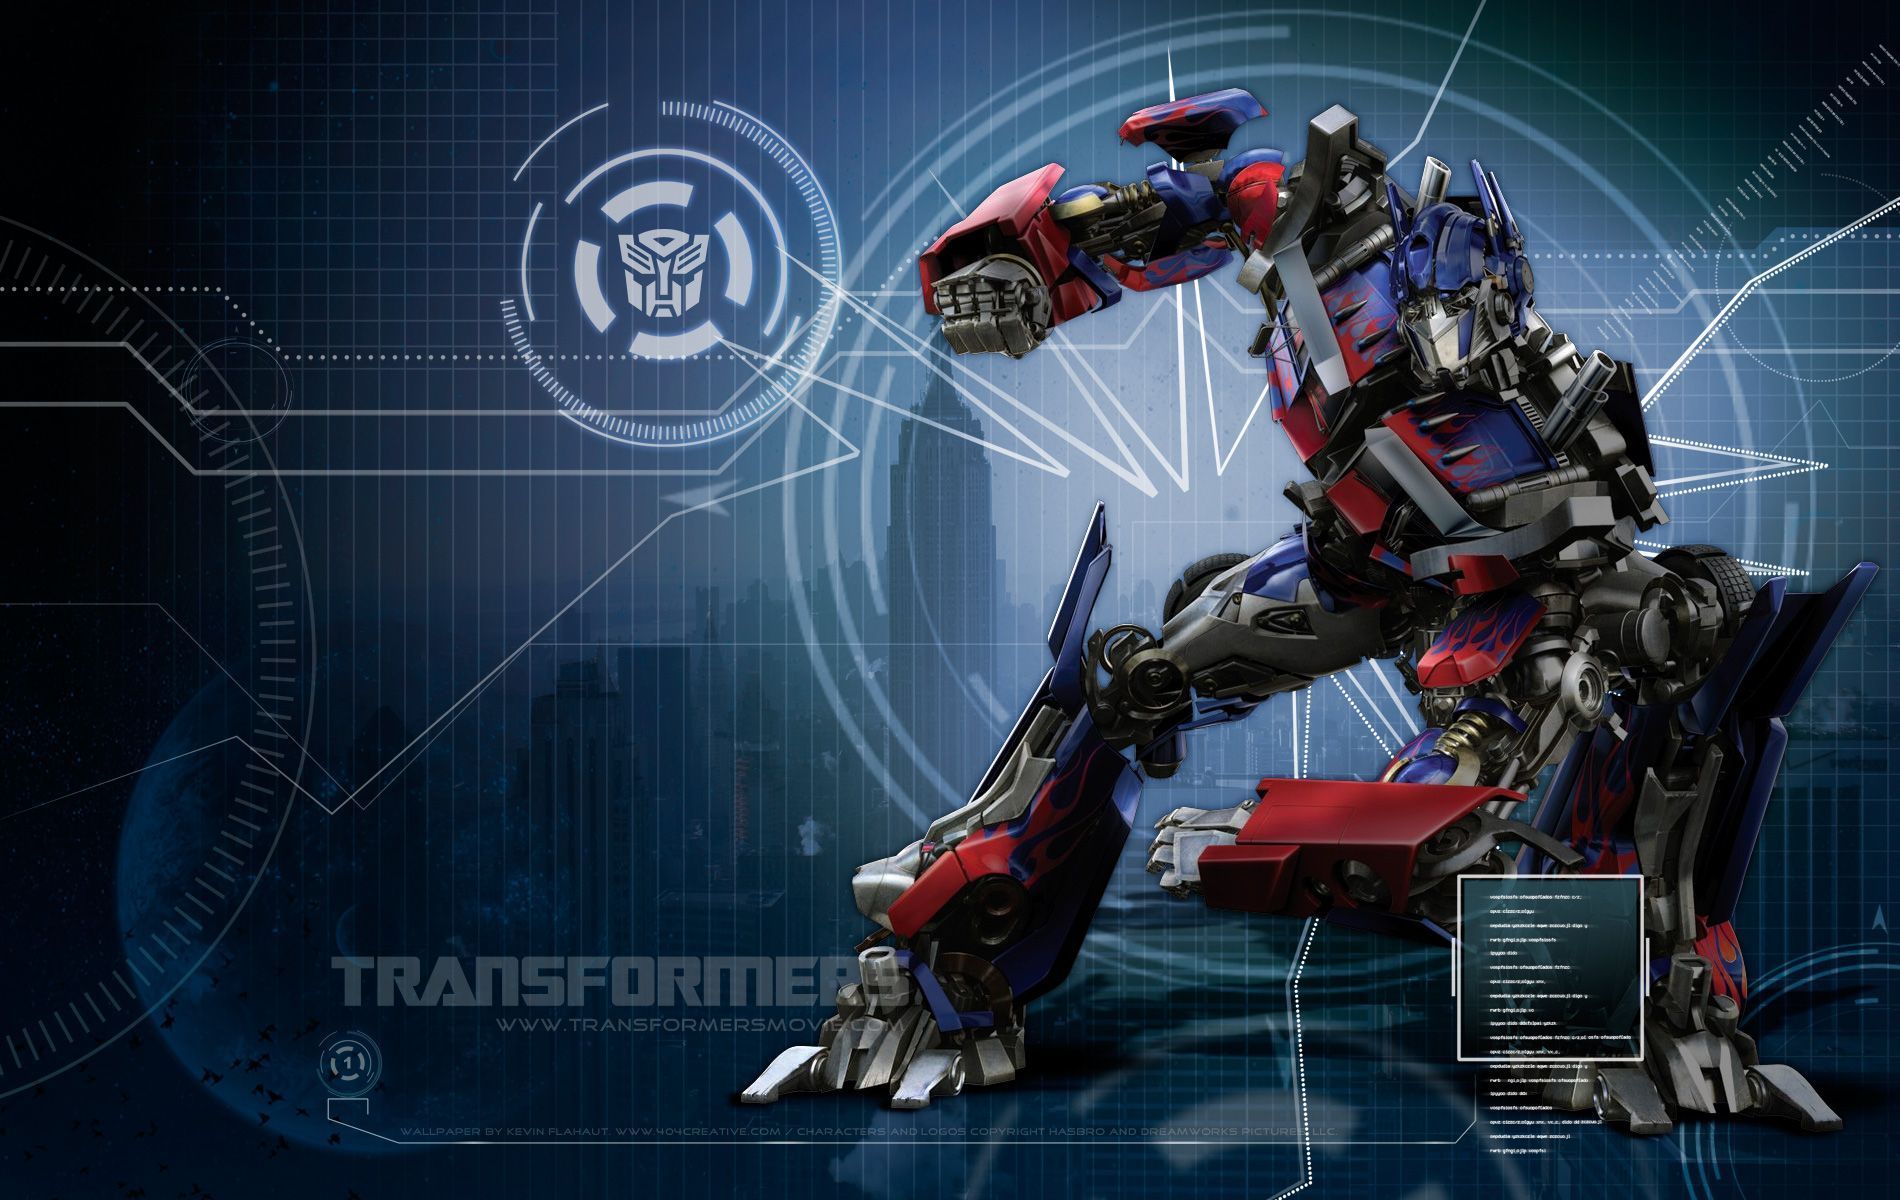 Transformers Ultimate Collection Screensavers, Wallpapers